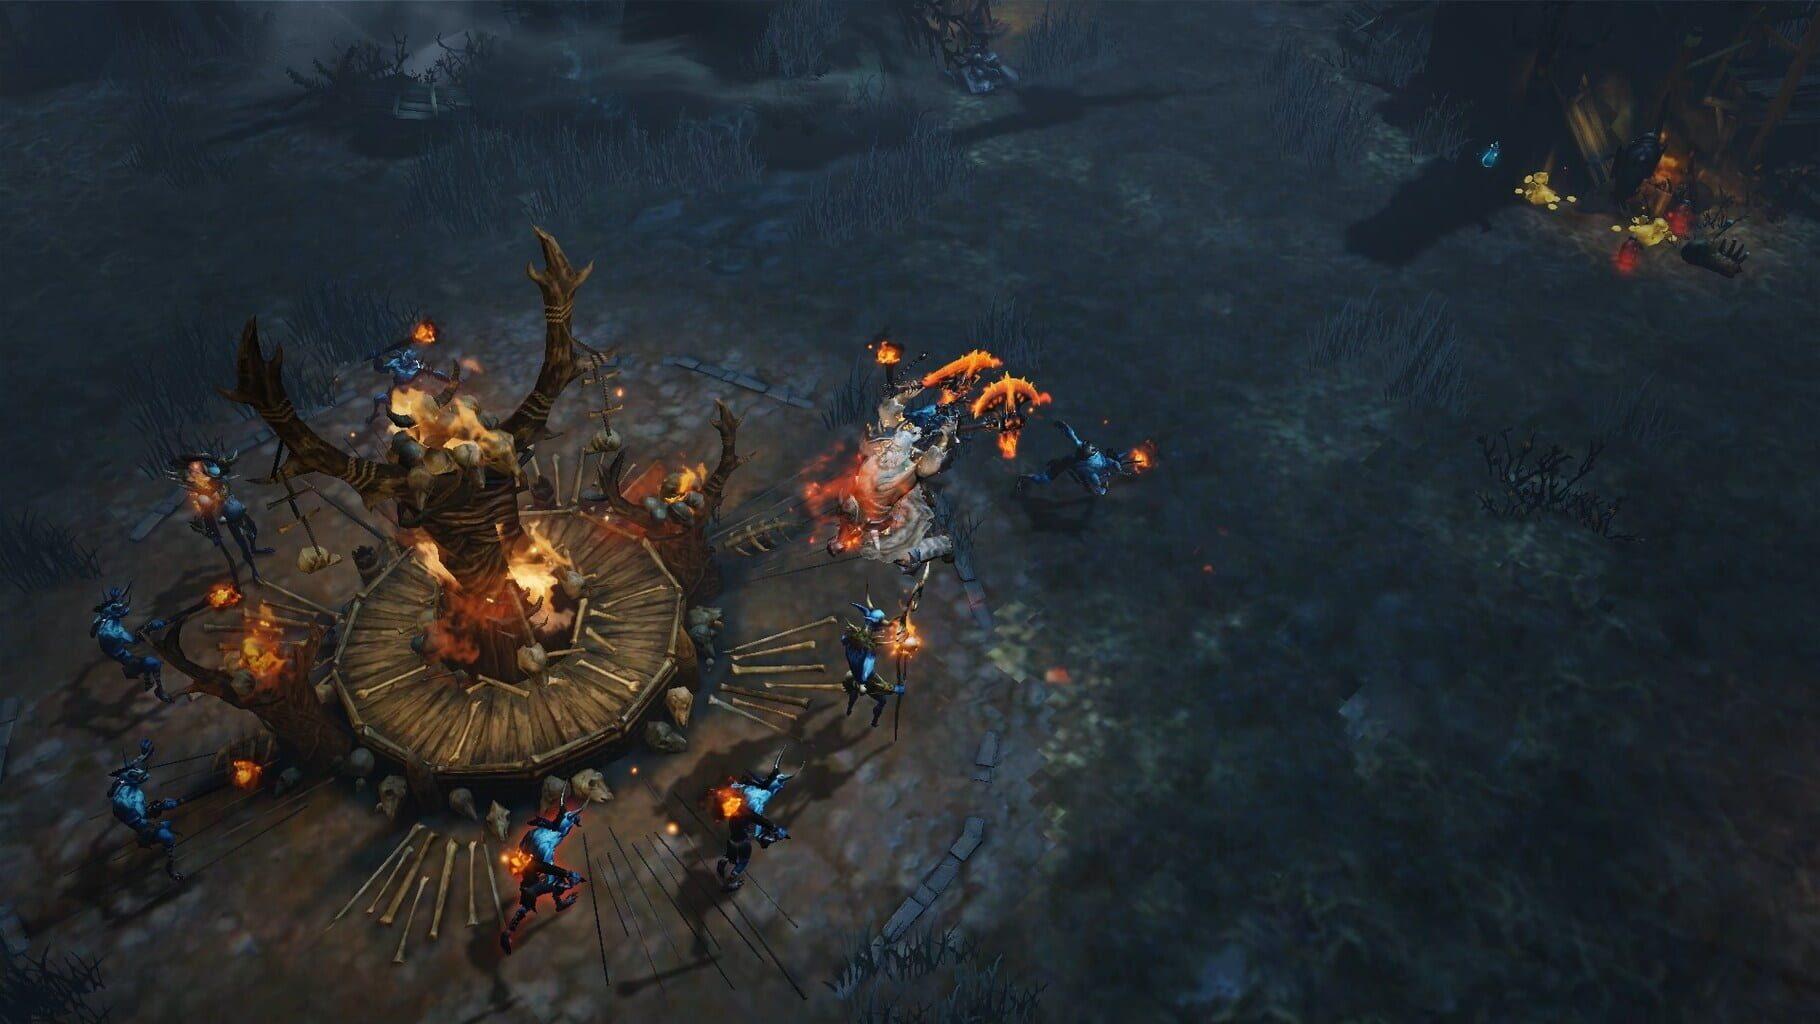 Diablo Immortal' Will Have To Do For Now